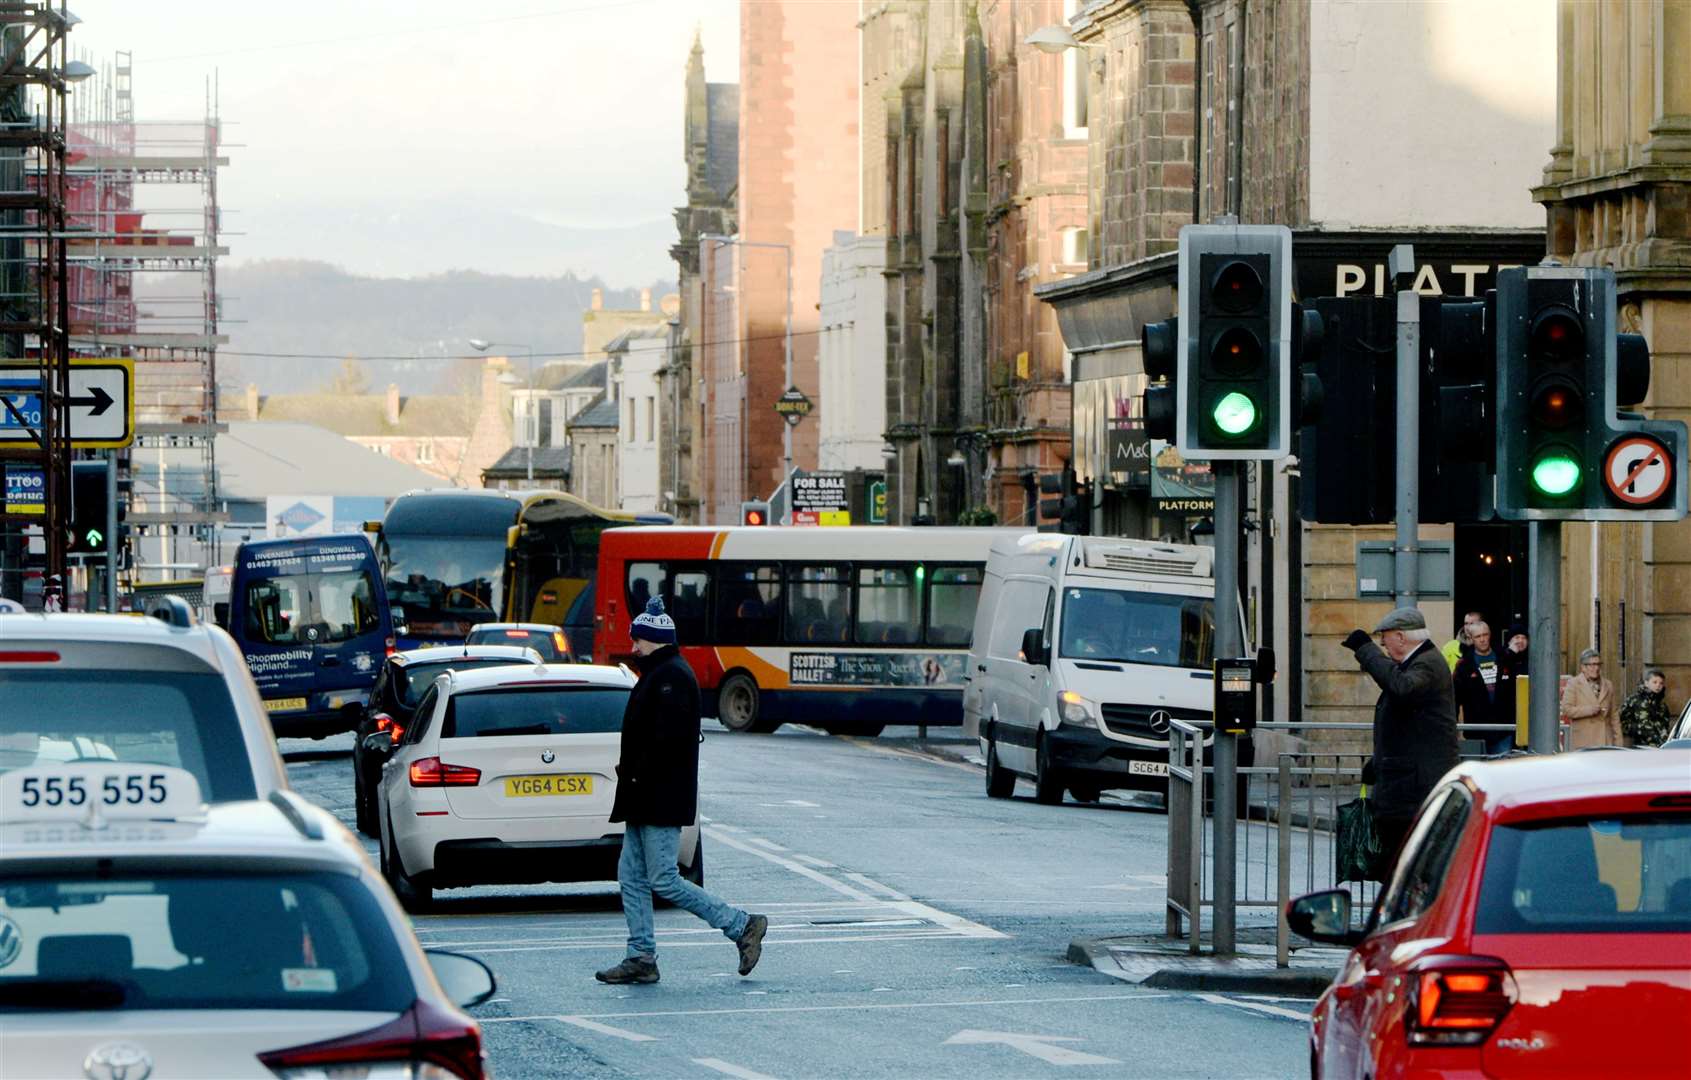 Academy Street in Inverness is the fourth most polluted in Scotland.